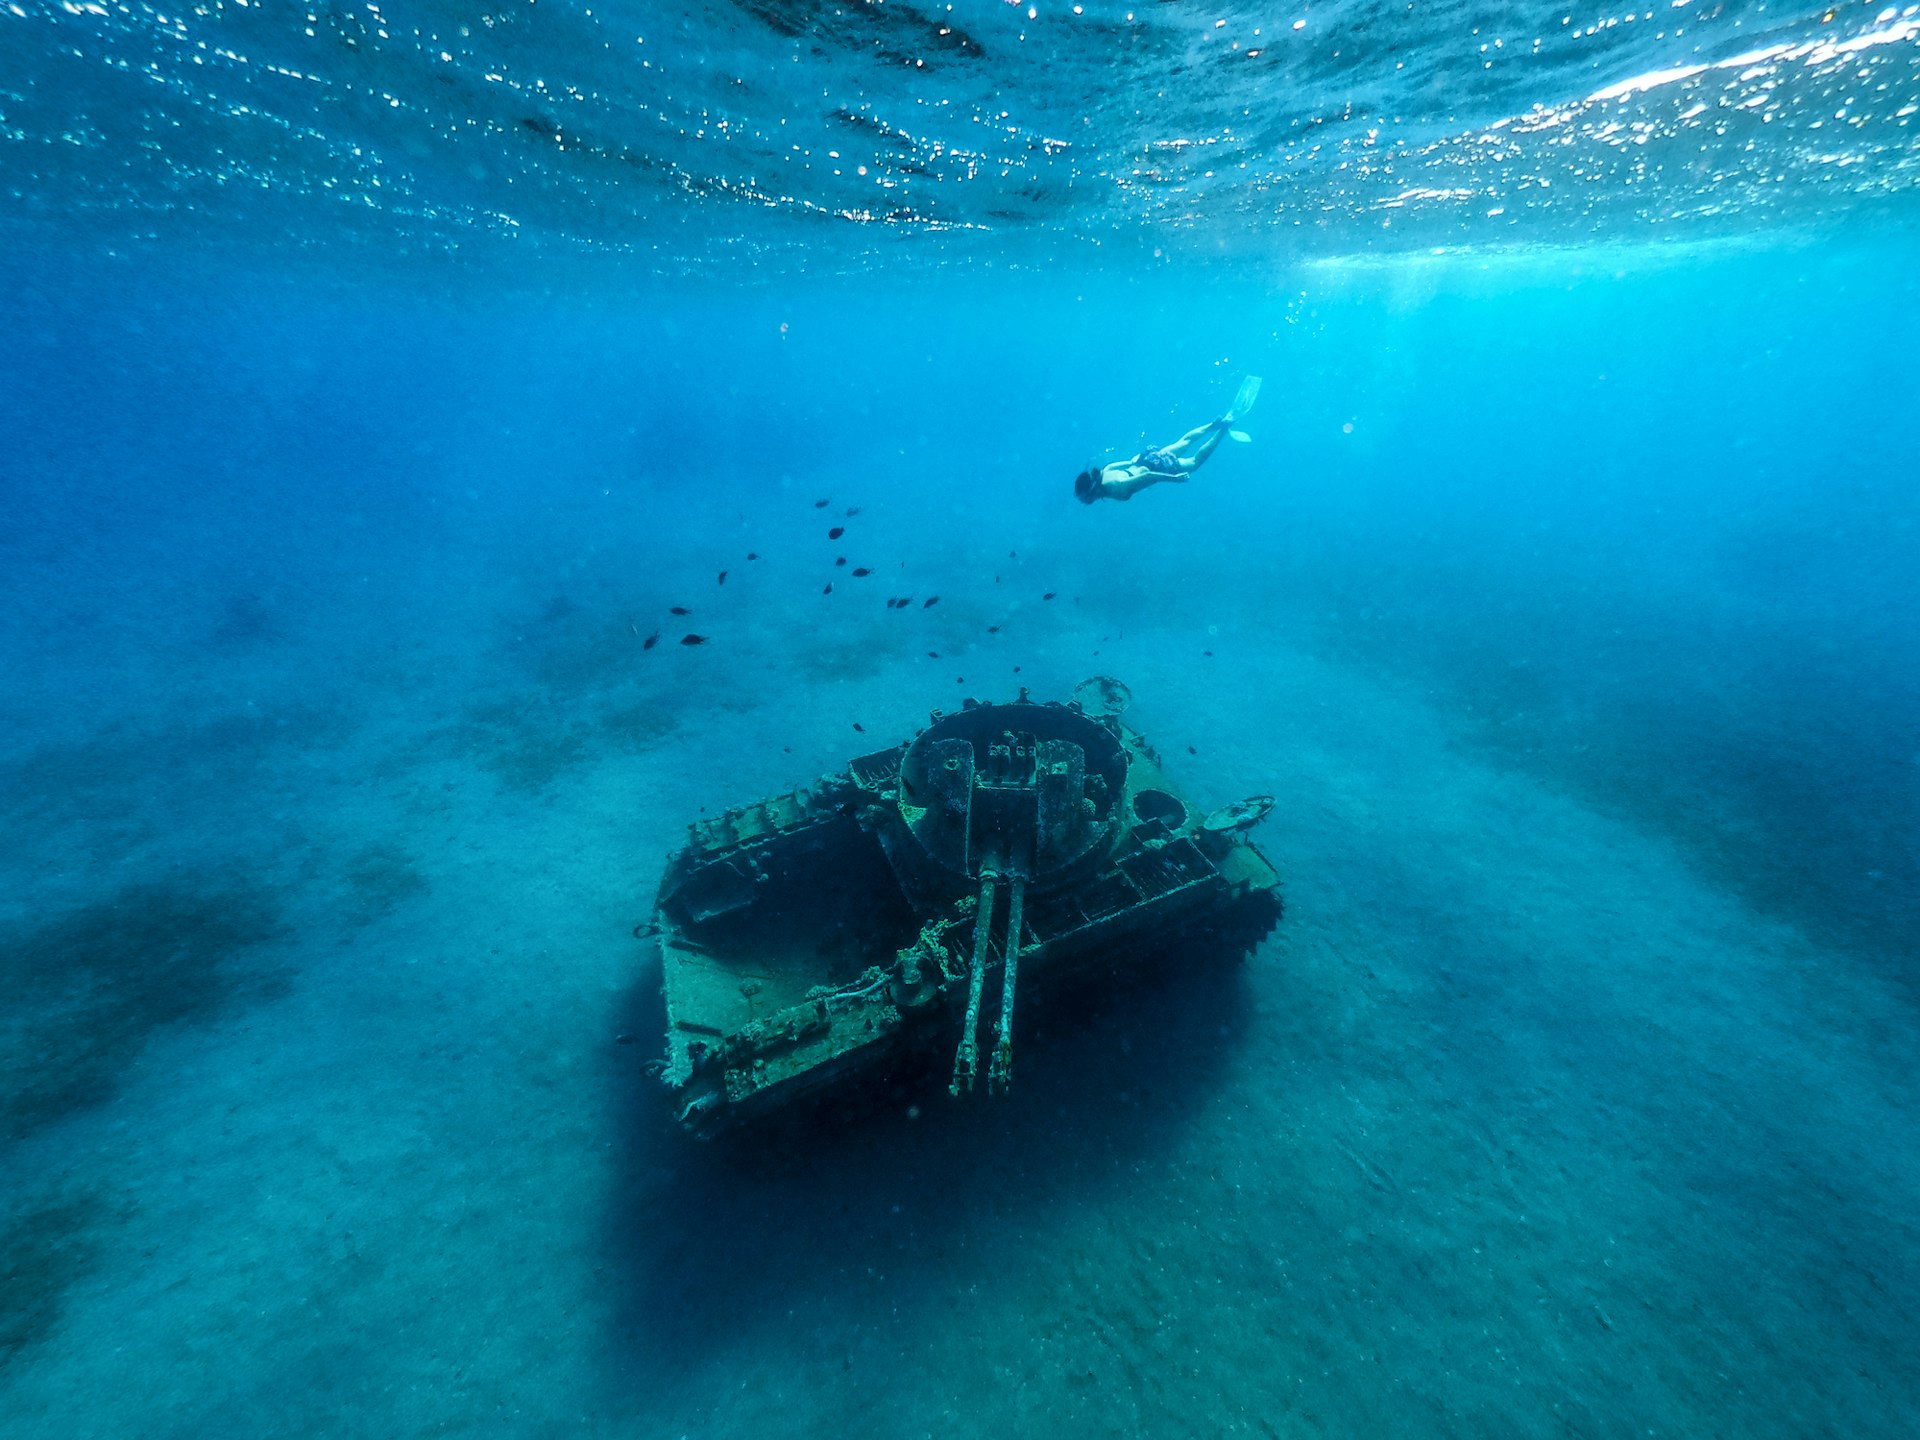 A snorkeler dives downwards towards the wreck of a tank that has been placed at the bottom of the sea